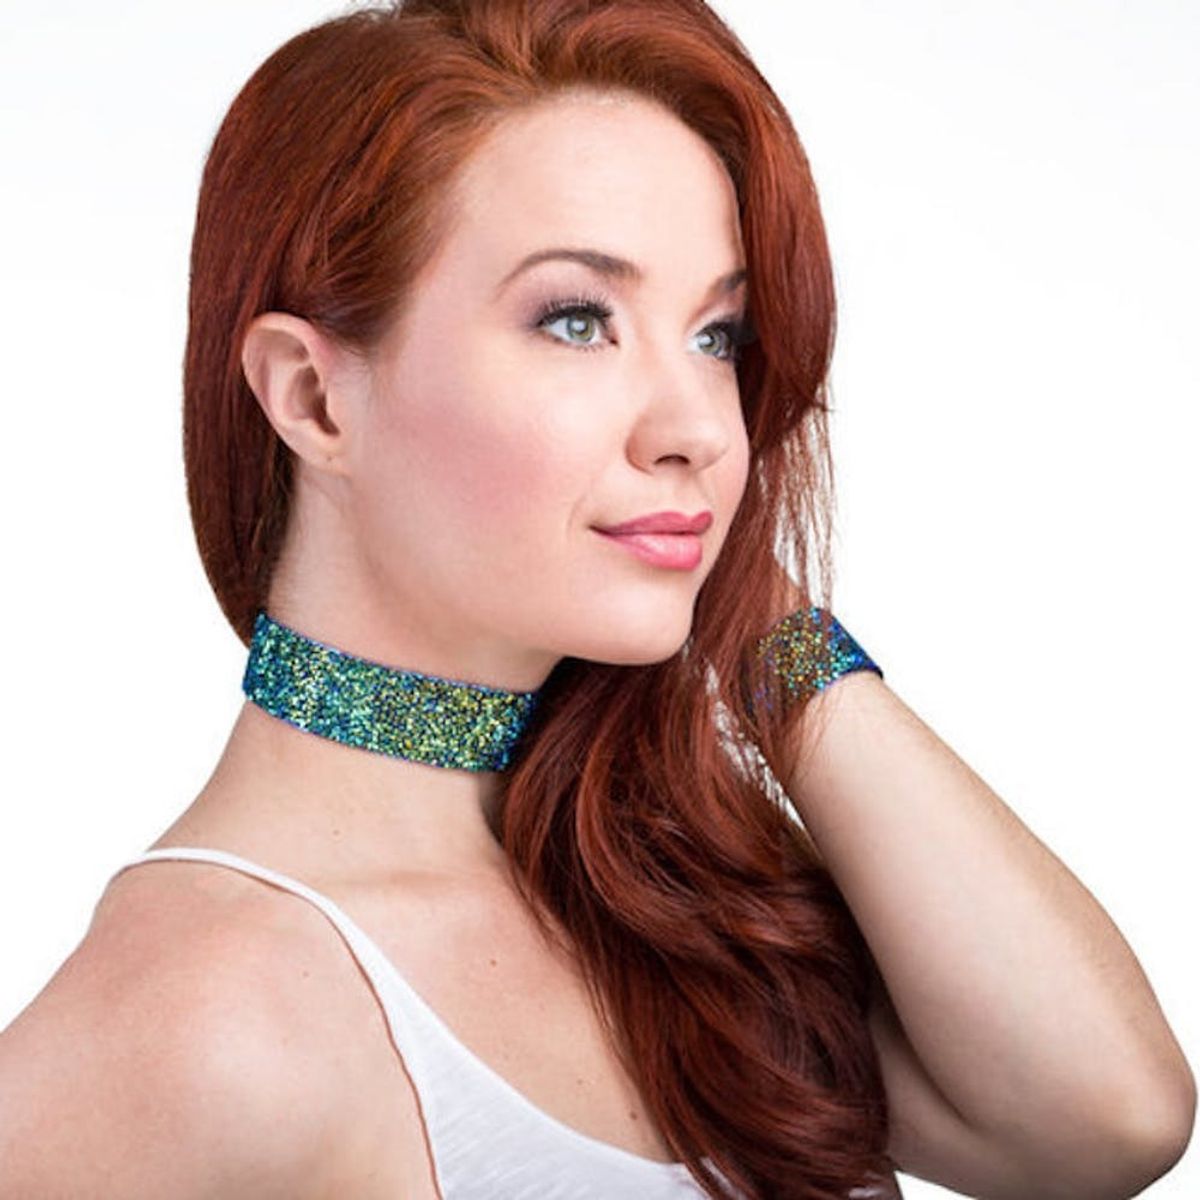 These New Disney Princess-Inspired Chokers Are Here to Make Your Dreams Come True